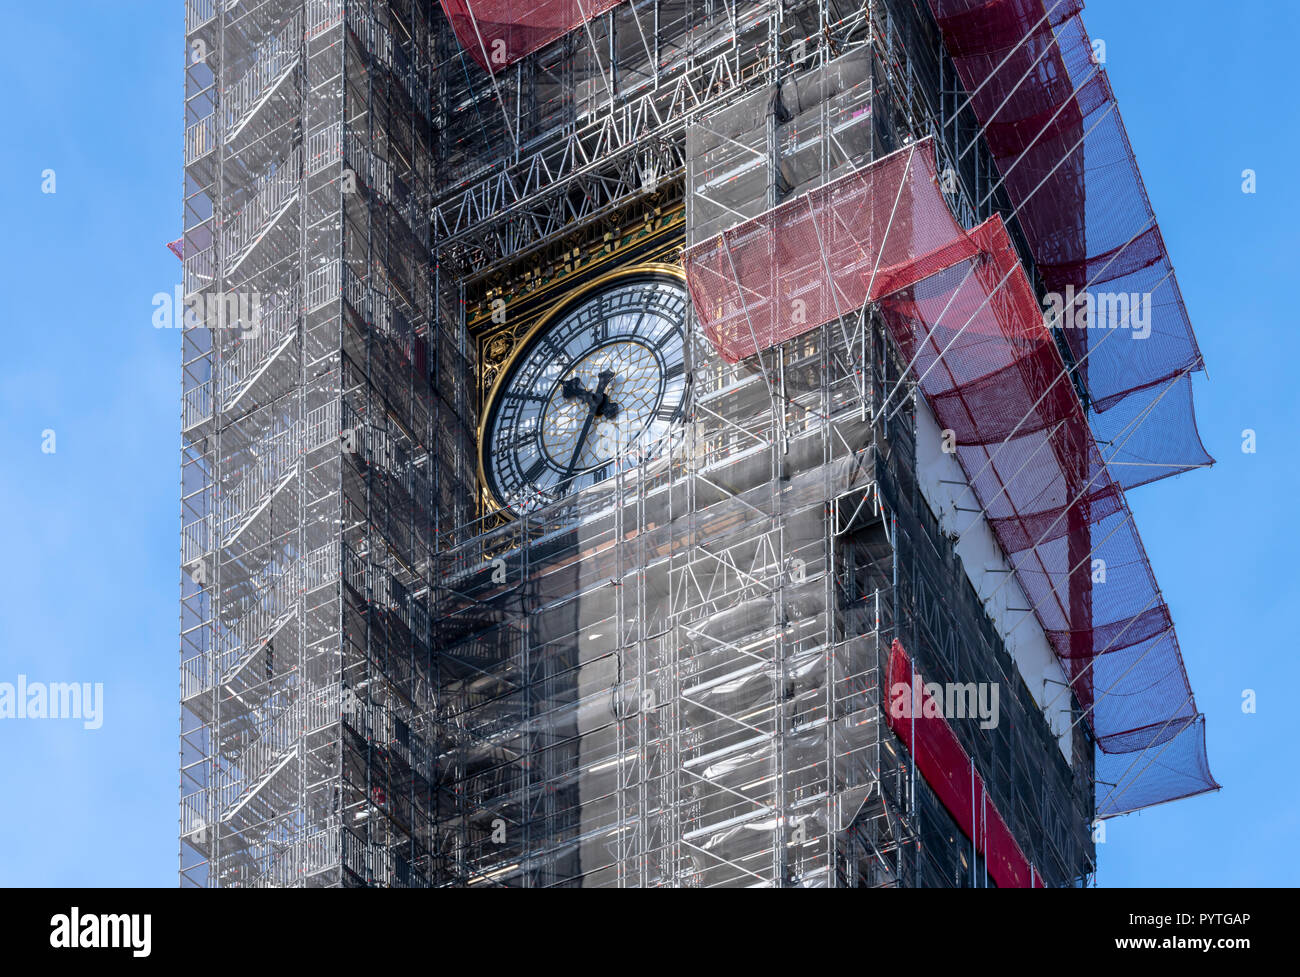 Elizabeth Tower at the Houses of Parliament. Commonly called Big Ben, which is actually the name of the bell in the clock tower. Covered in scaffolding. Stock Photo